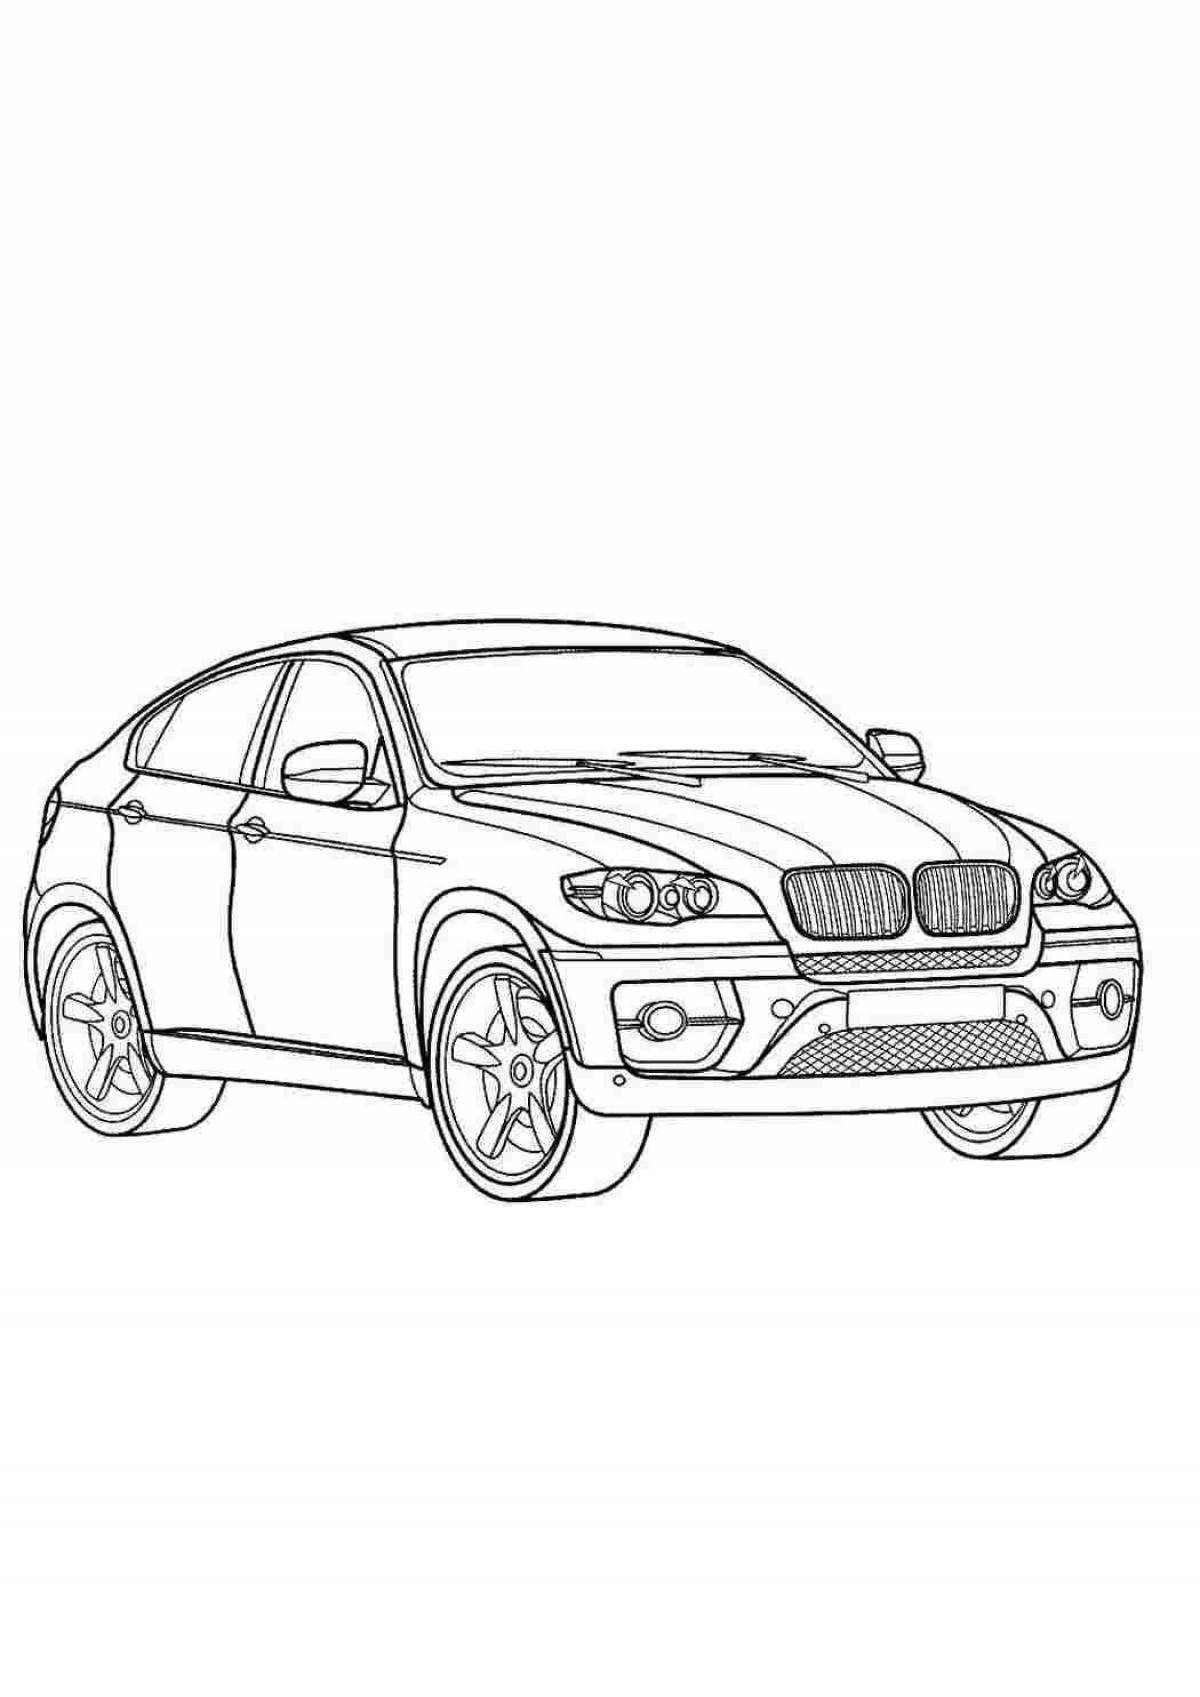 Dazzling bmw x6 coloring book